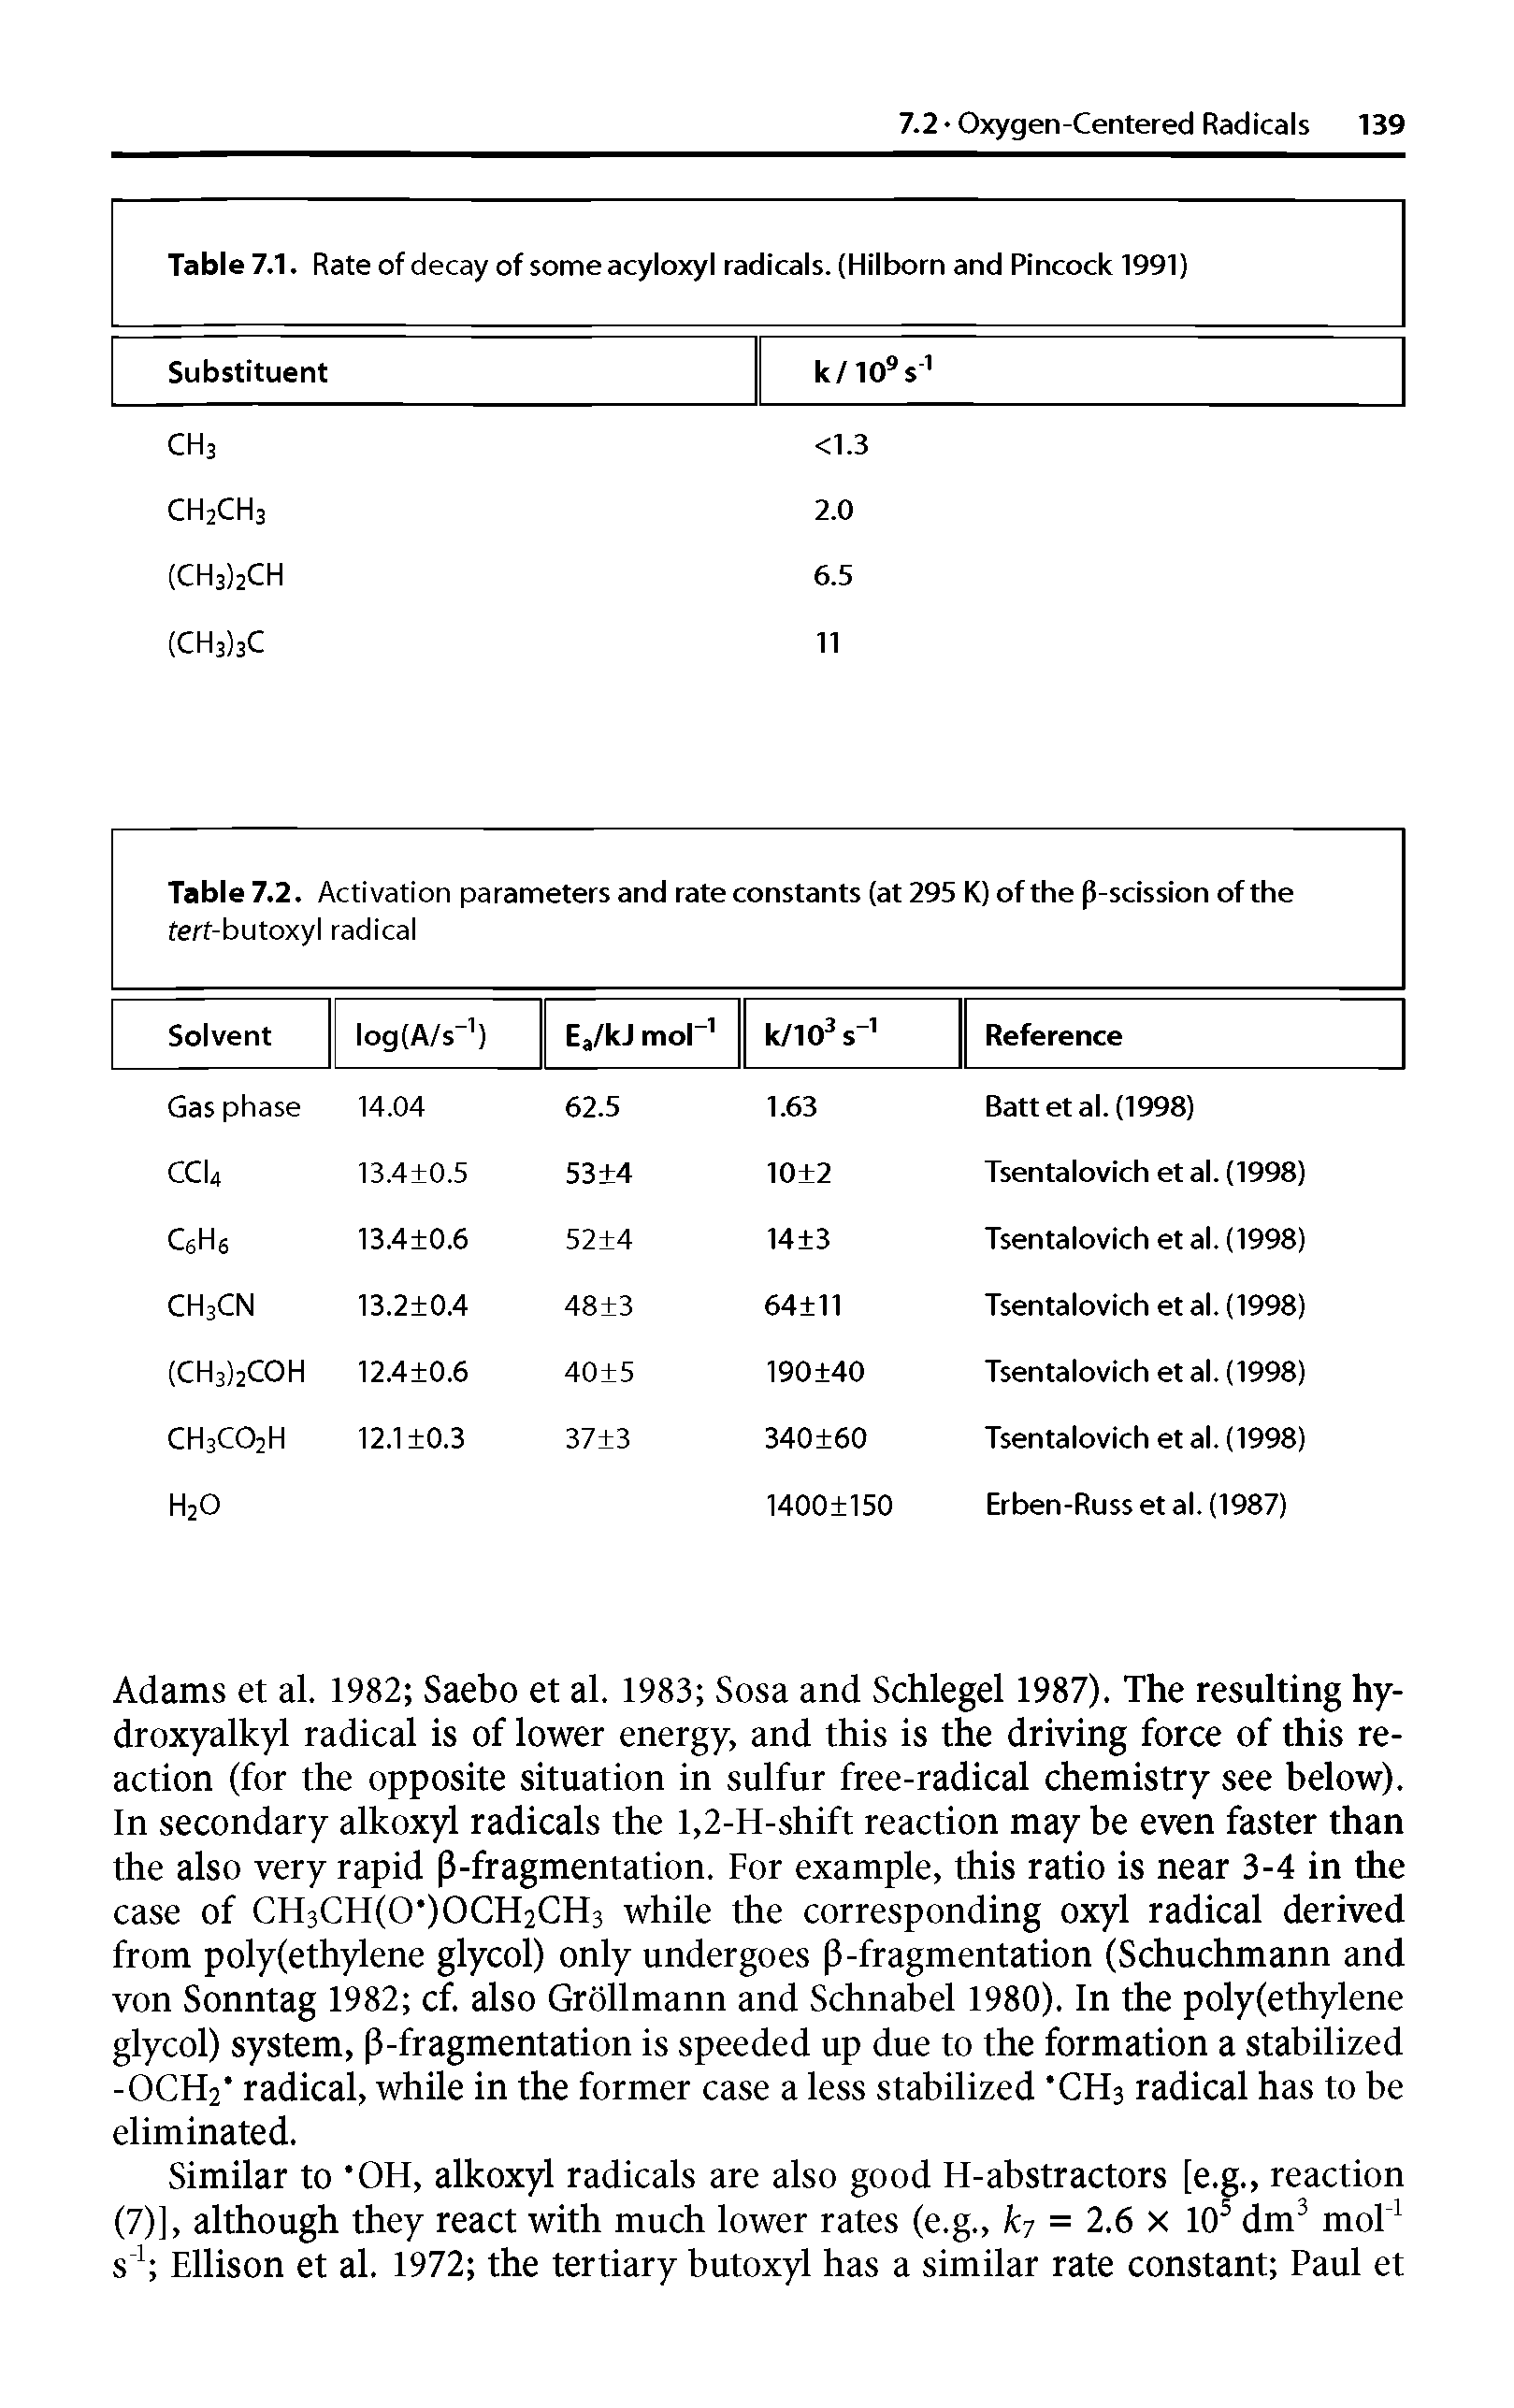 Table 7.1. Rate of decay of some acyloxyl radicals. (Hilborn and Pincock 1991)...